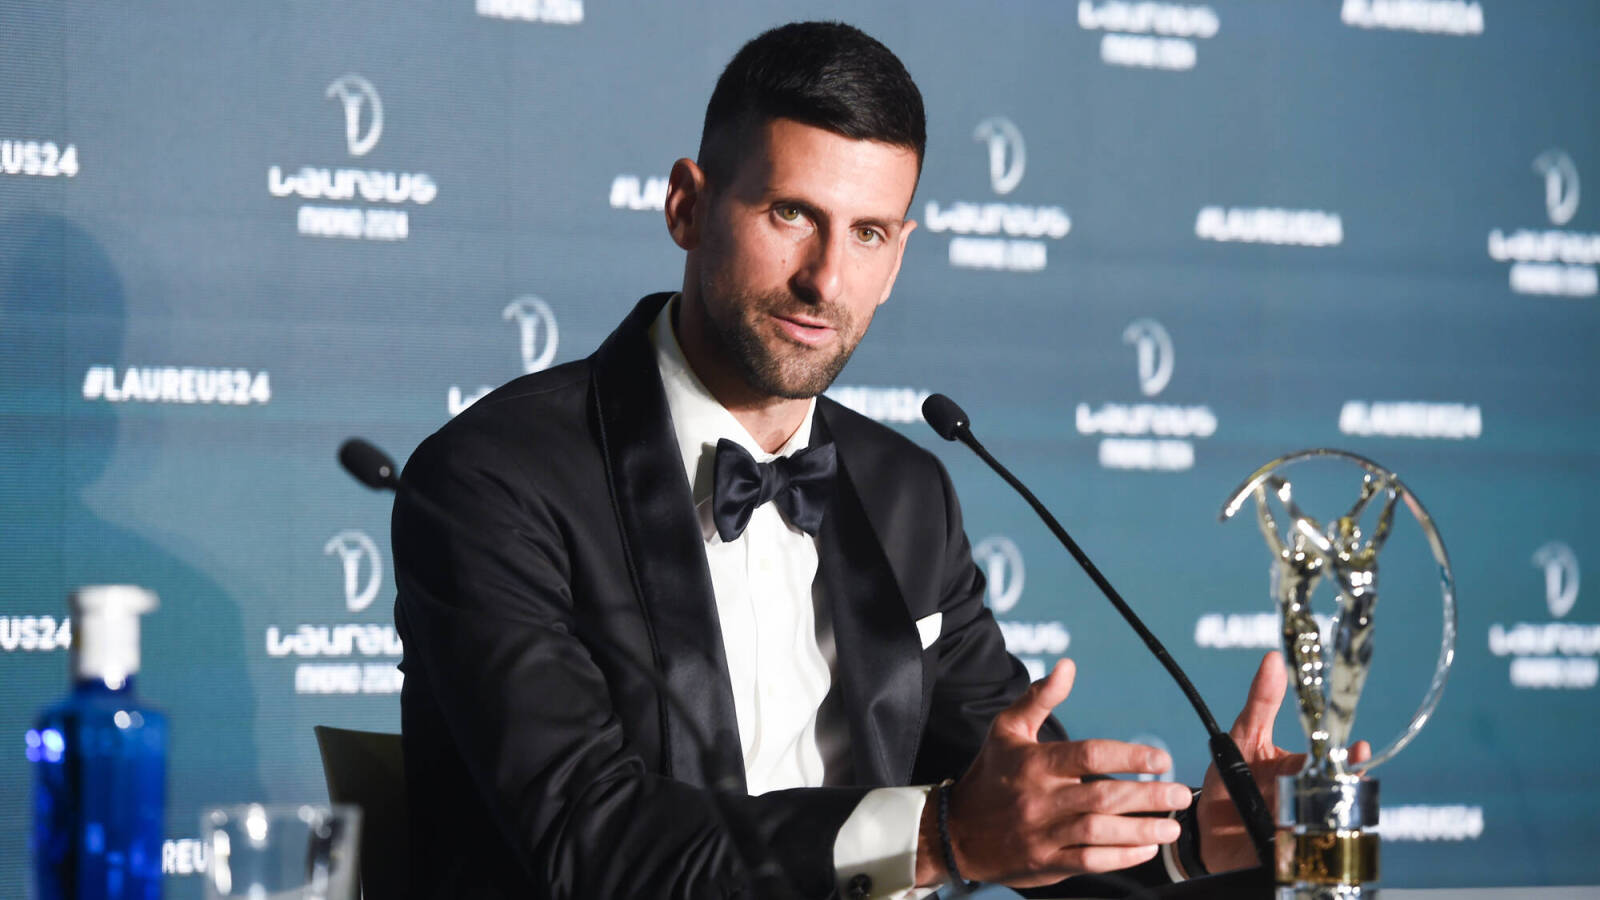 'I’m still young, I have a lot of time,' Novak Djokovic announces hopeful participation update for Rome, Wimbledon and the Olympics amidst Madrid heartbreak